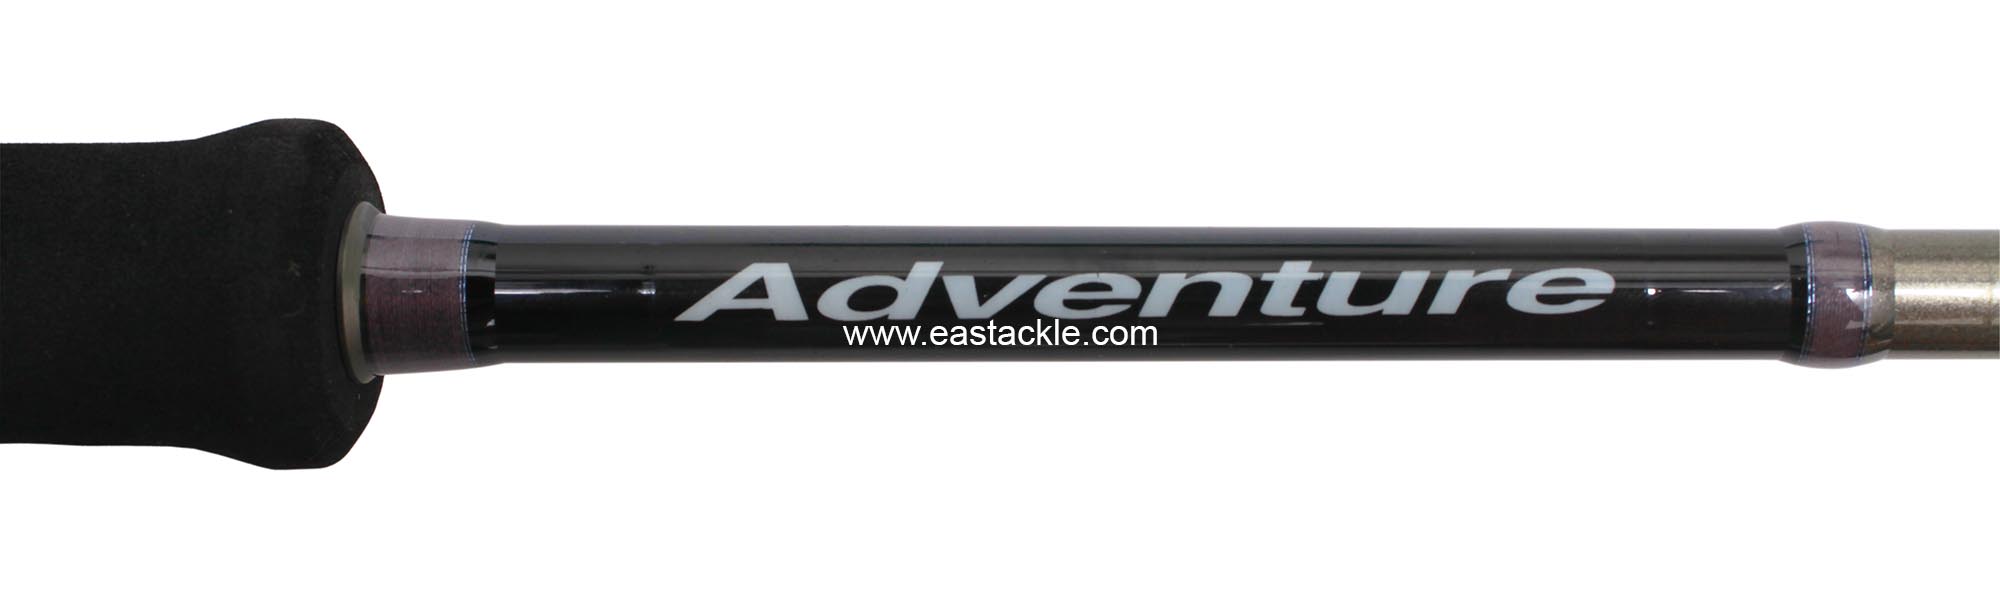 Storm - Adventure - AVC662MHF - Bait Casting Rod - Logo | Eastackle